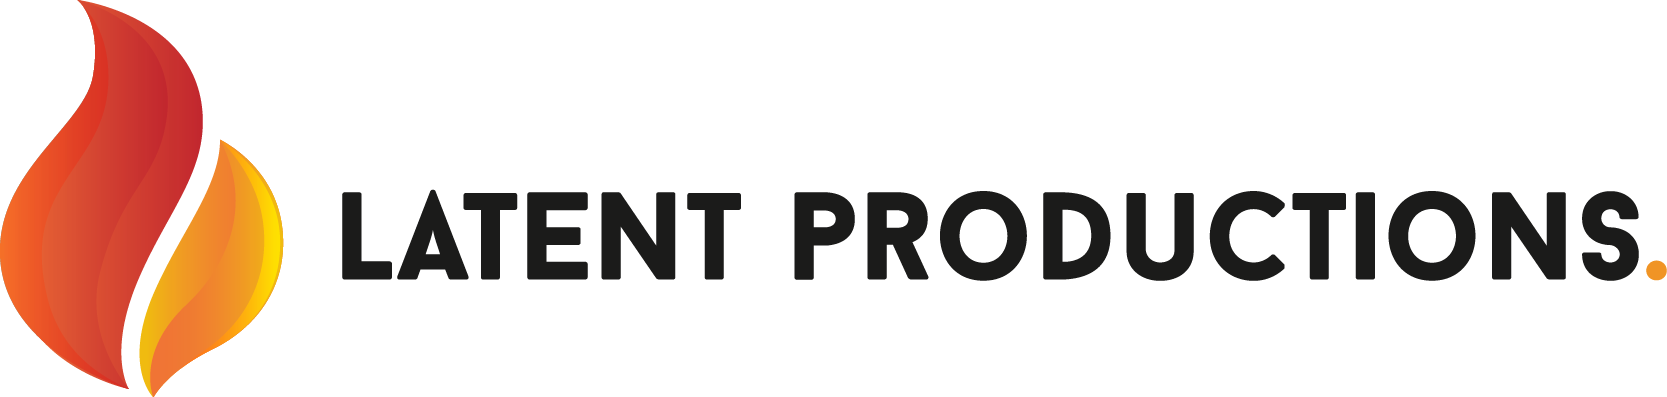 Latent Productions video production company austin tx